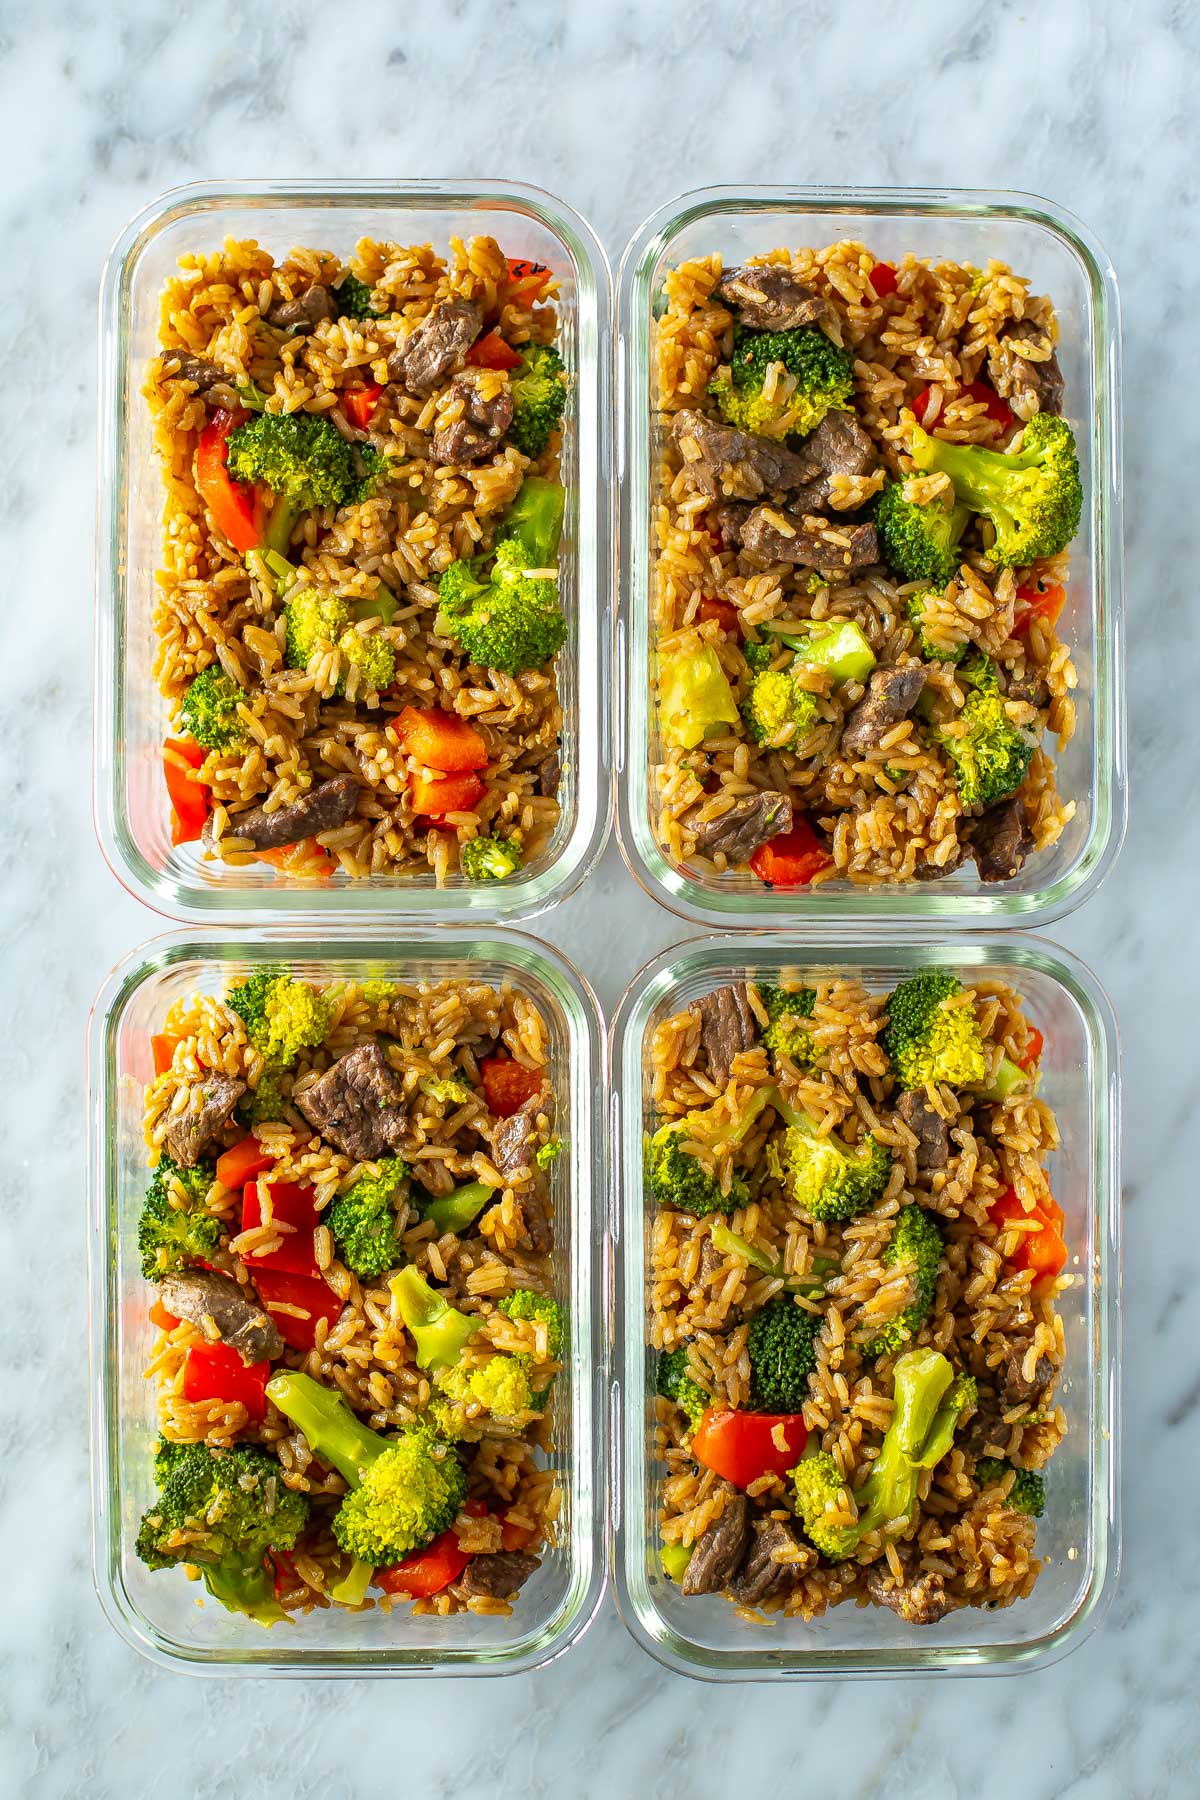 Four meal prep containers, each with a serving of Instant Pot beef and broccoli.